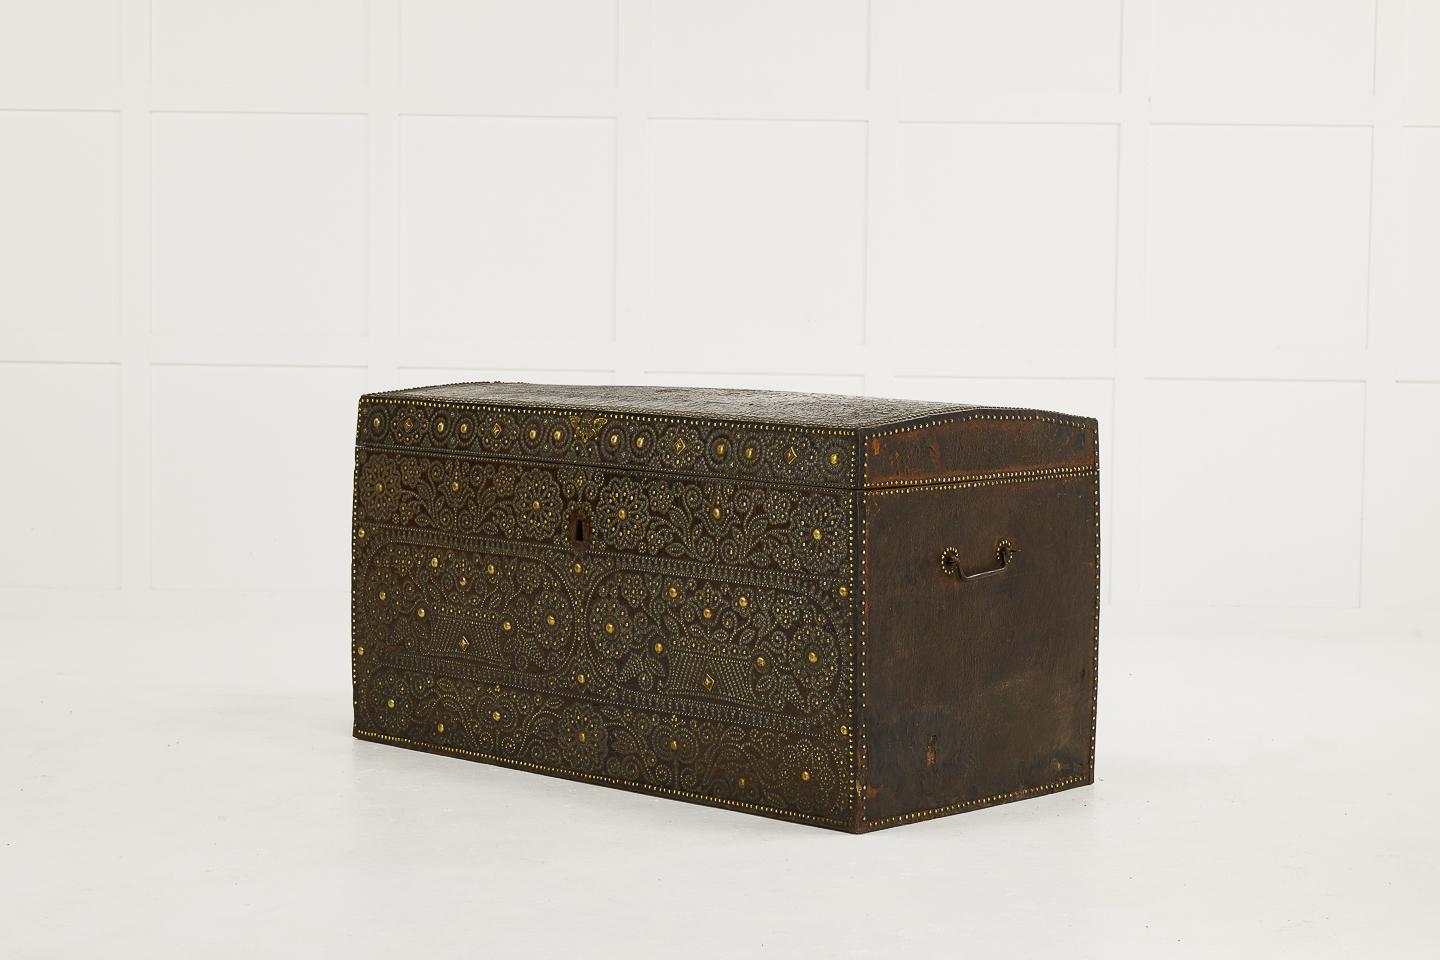 Late 17th-early 18th century French travelling trunk with brass stud decoration and wrought iron handles.